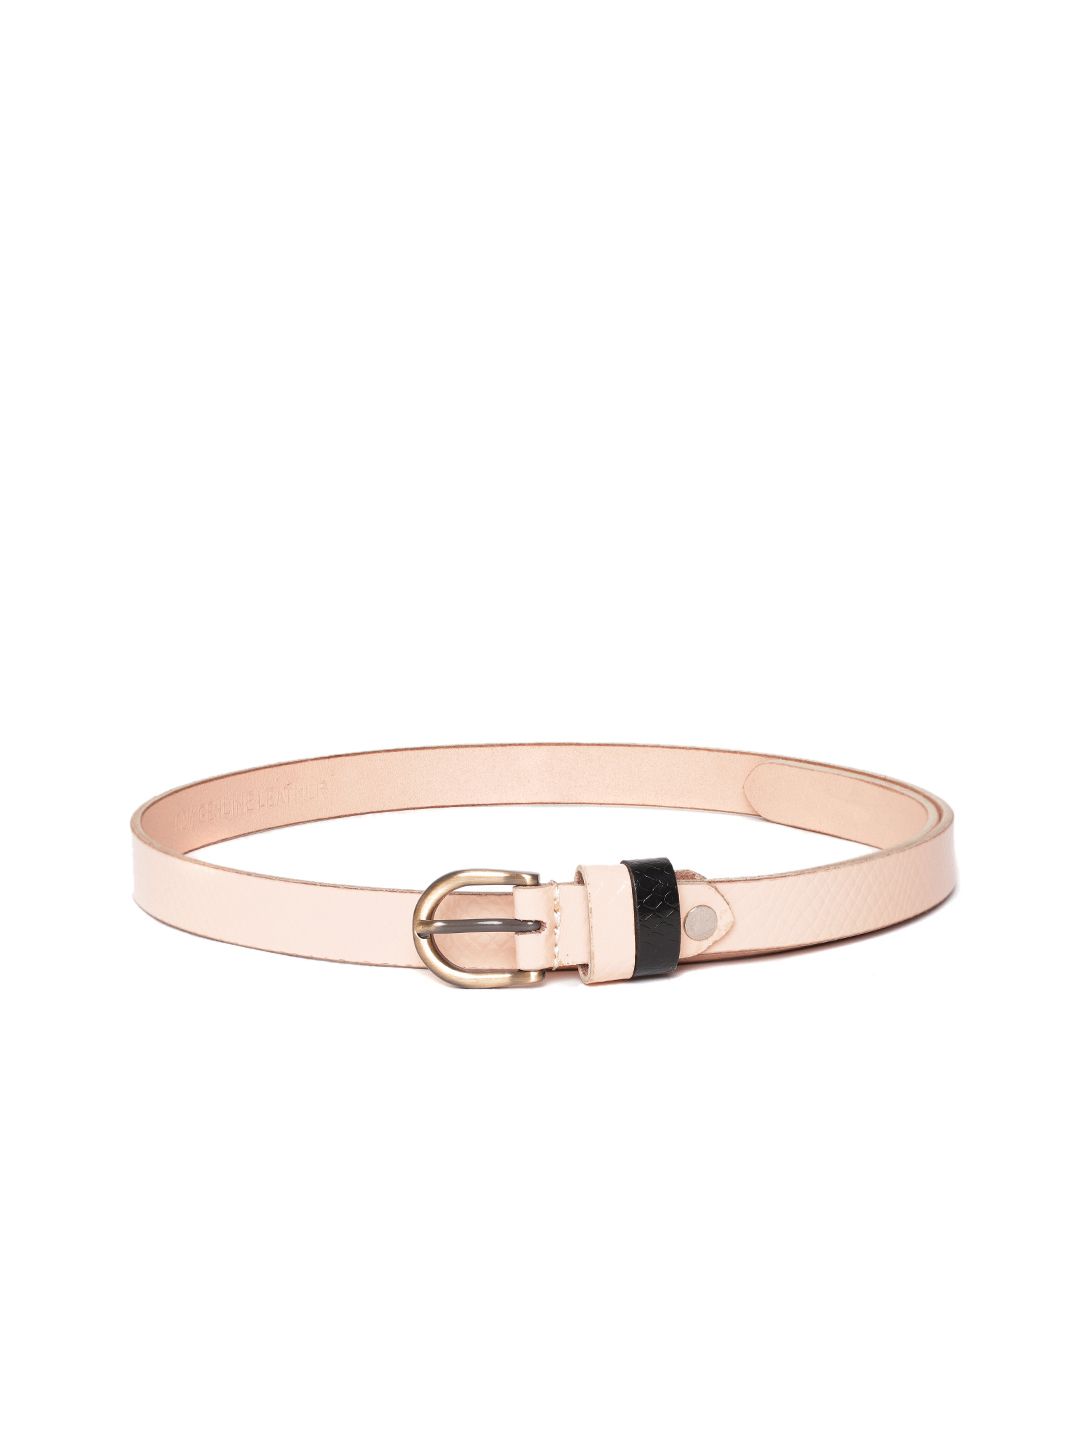 Mast & Harbour Women Light Peach-Coloured Snakeskin Textured Leather Belt Price in India